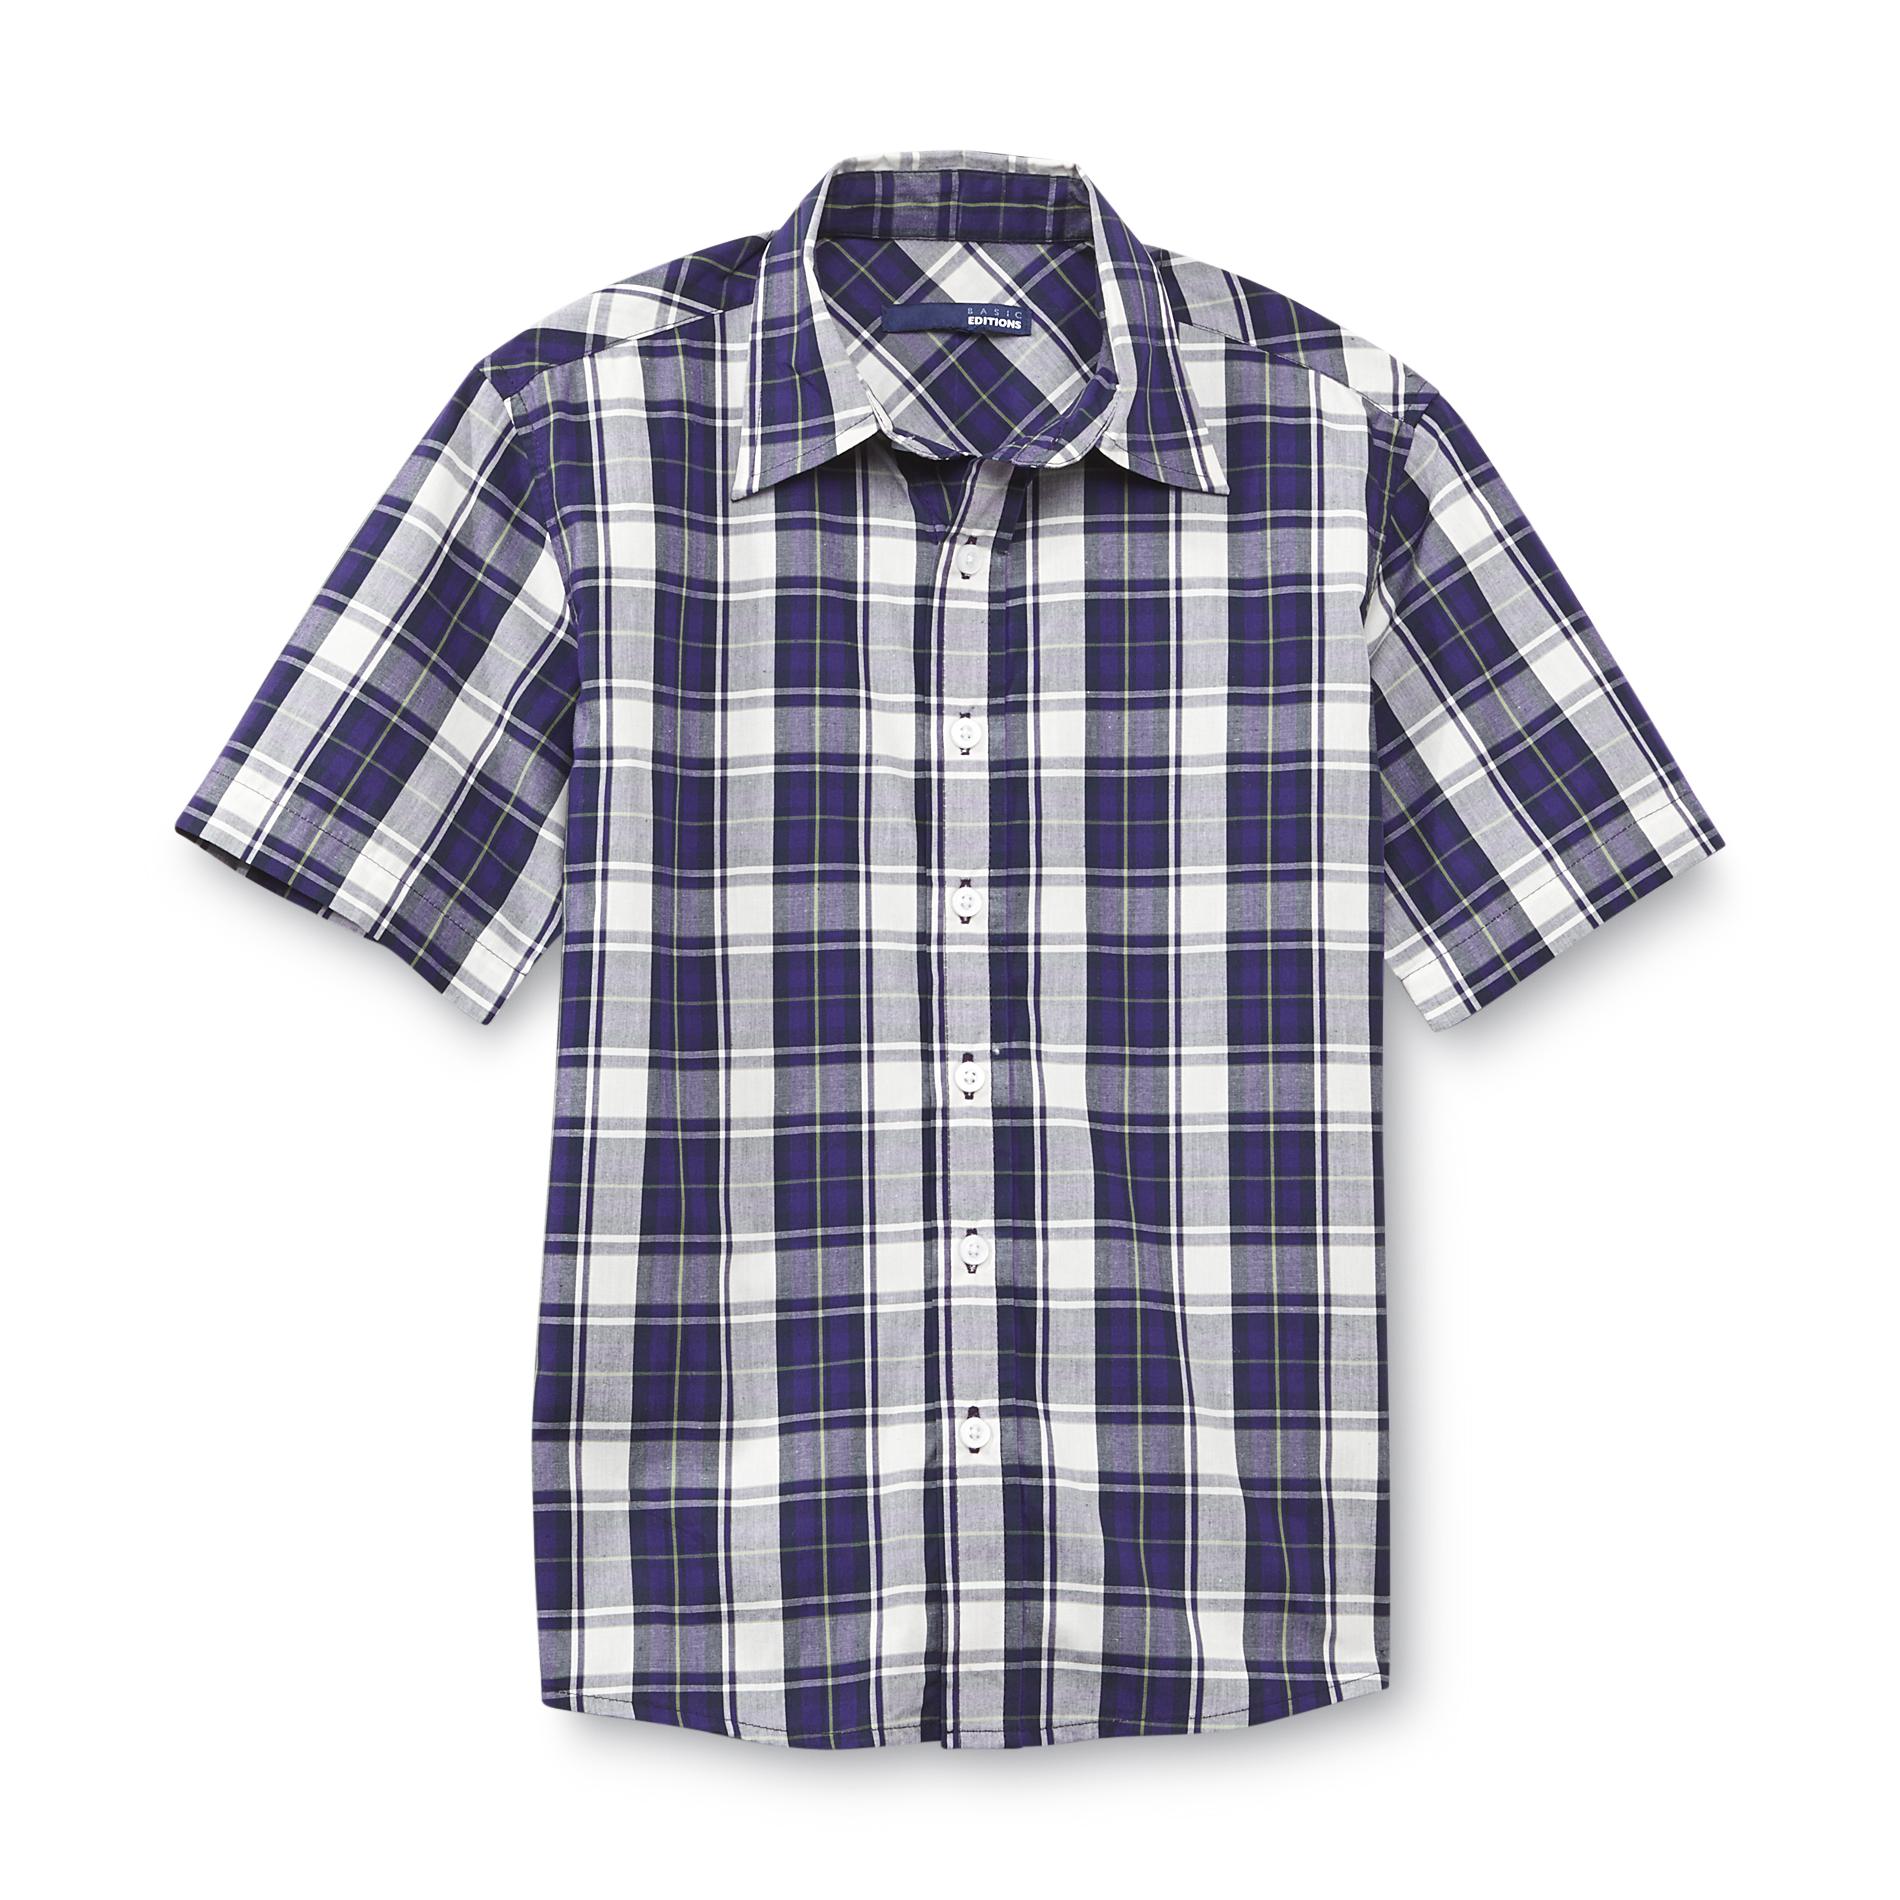 Basic Editions Boy's Short-Sleeve Button-Front Shirt - Plaid